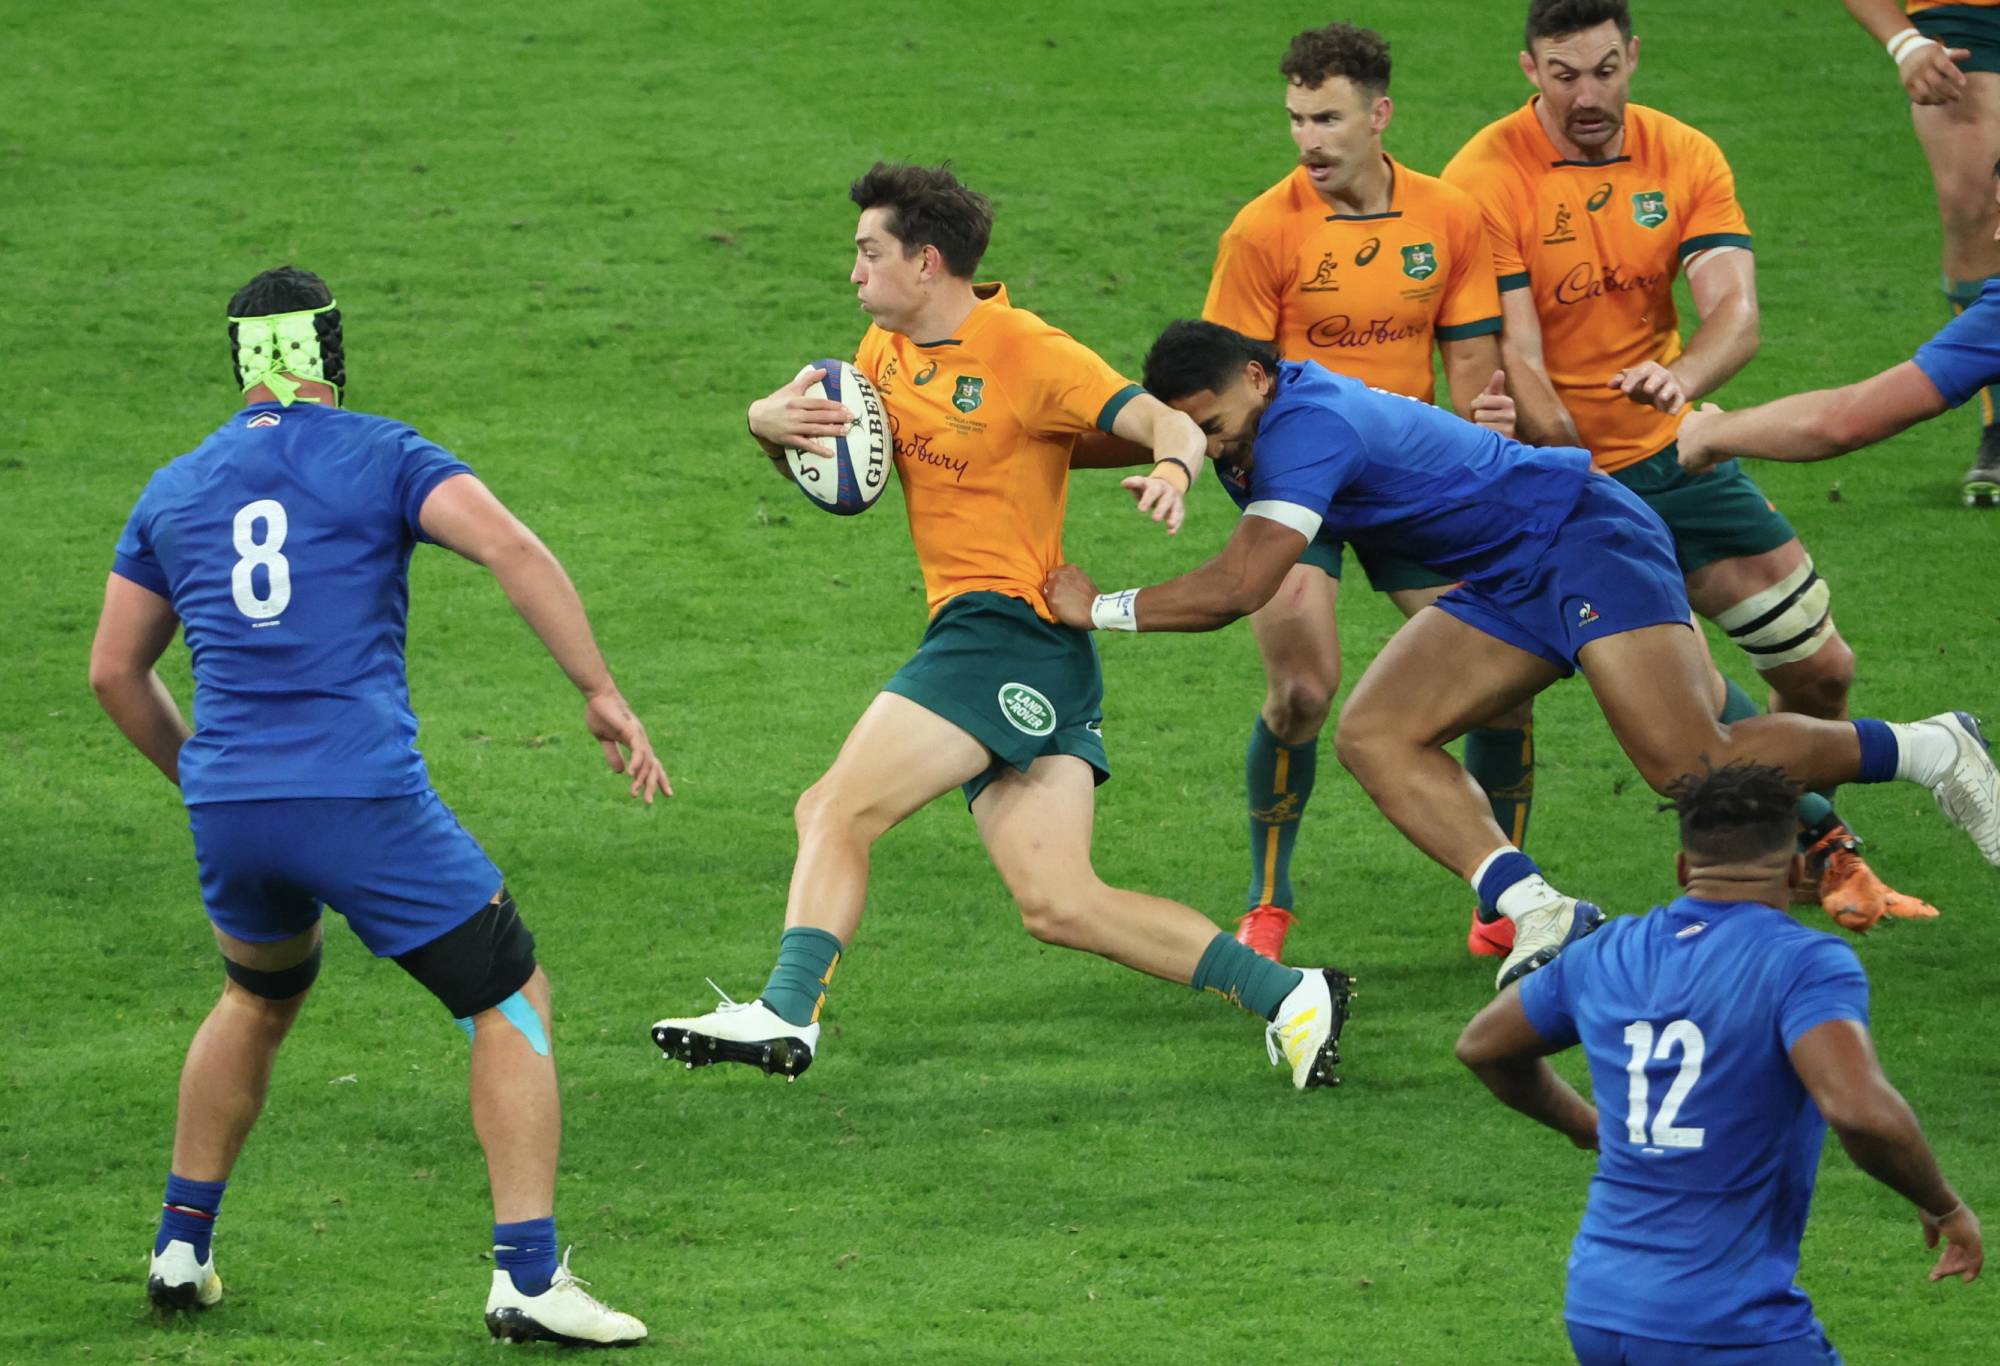 Jock Campbell of Team Australia in action during the Autumn Tour match between France and Australia at Stade de France on November 05, 2022 in Paris, France. (Photo by Xavier Laine/Getty Images)